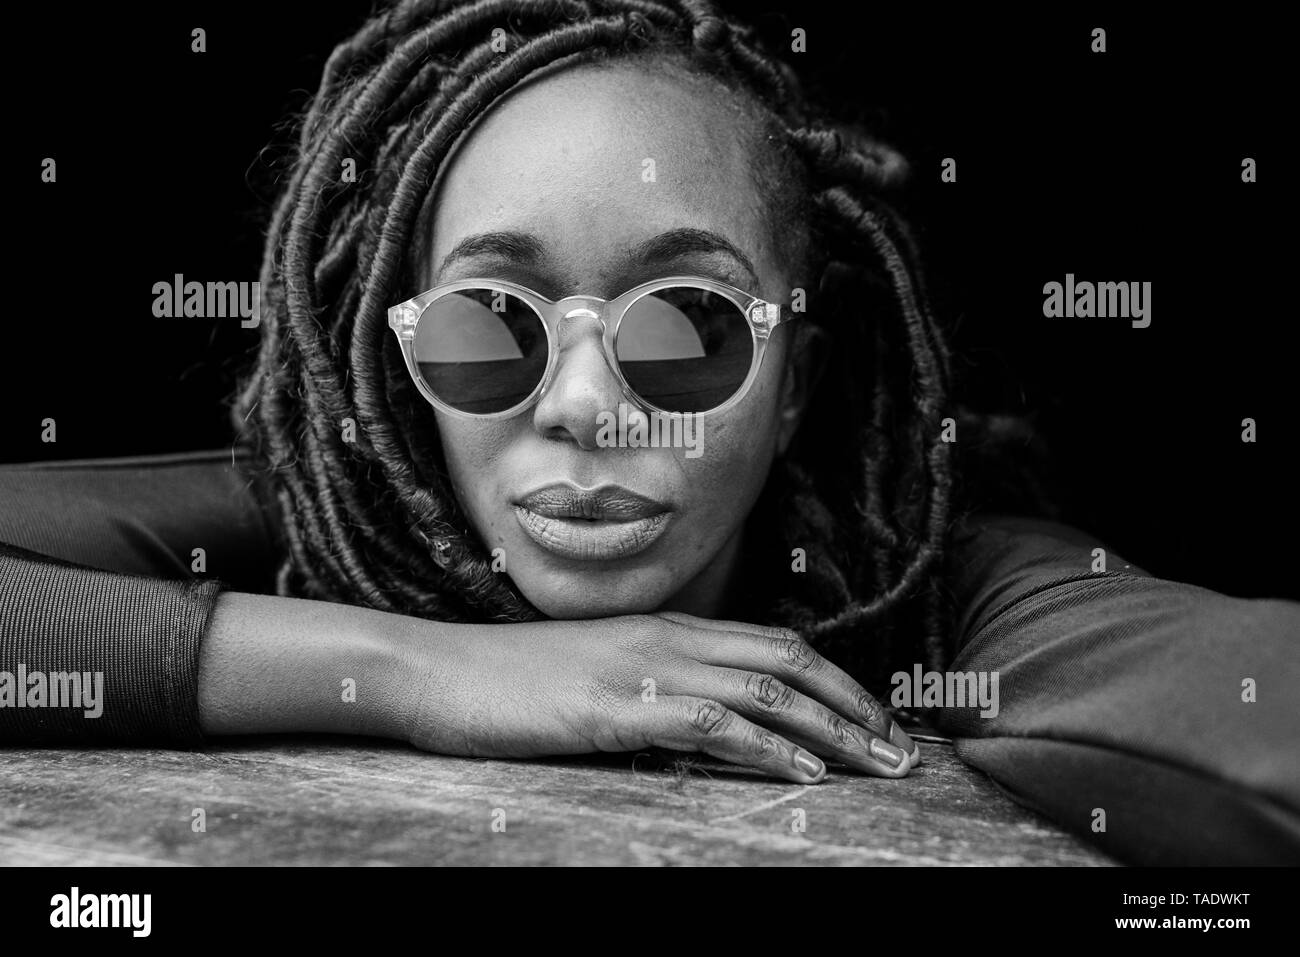 Portrait of woman with dreadlocks wearing sunglasses in front of black background Stock Photo